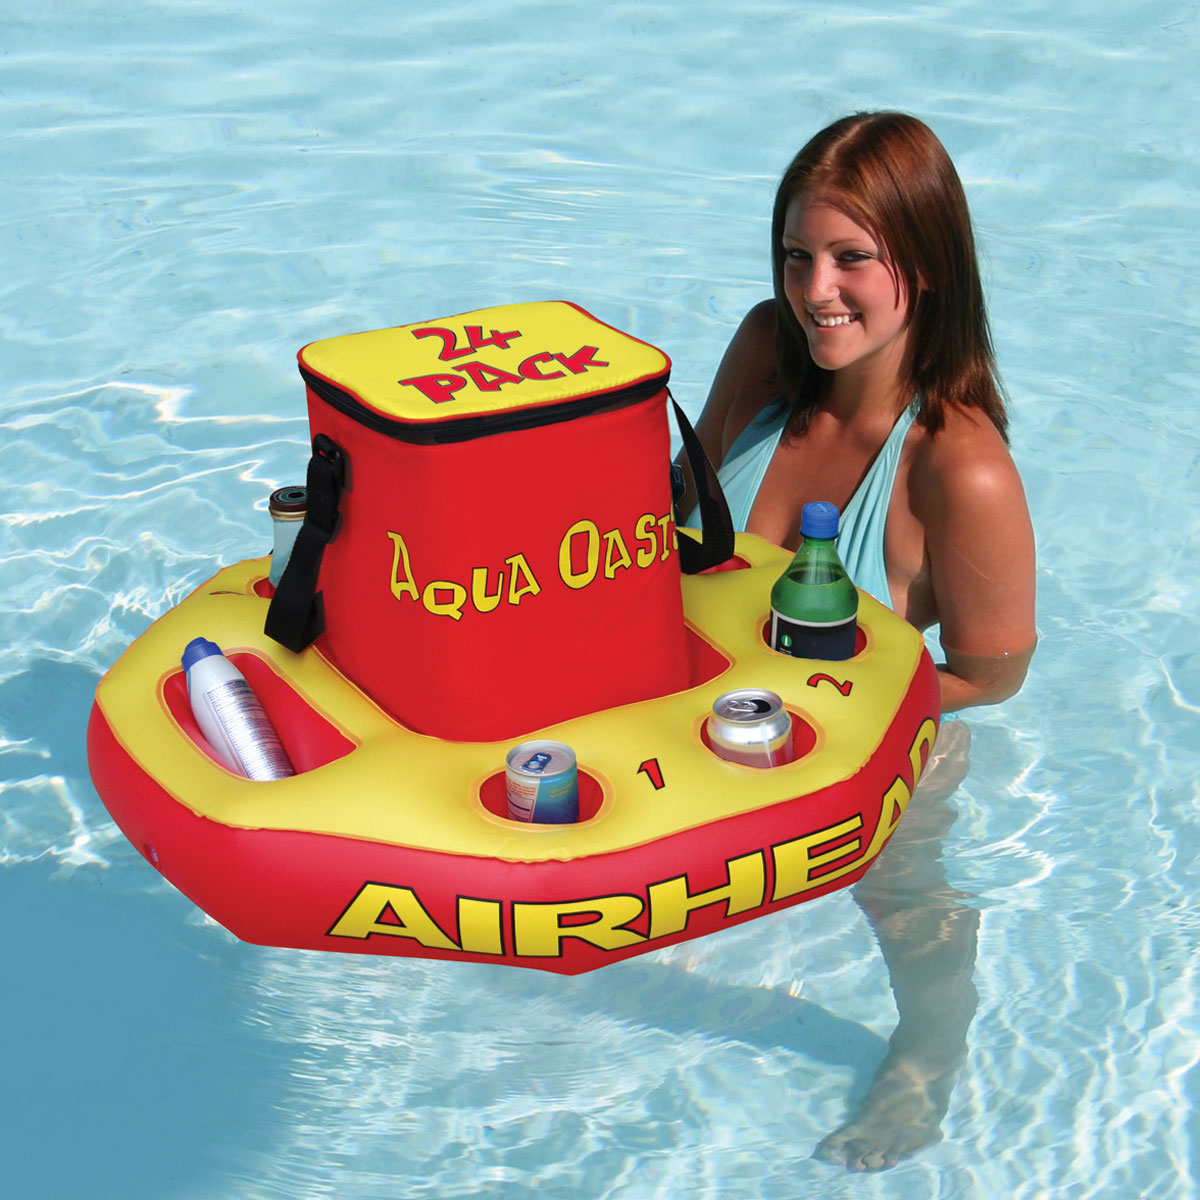 Kwik Tek Aqua Oasis Insulated Cooler with Removable Floating Base, Red